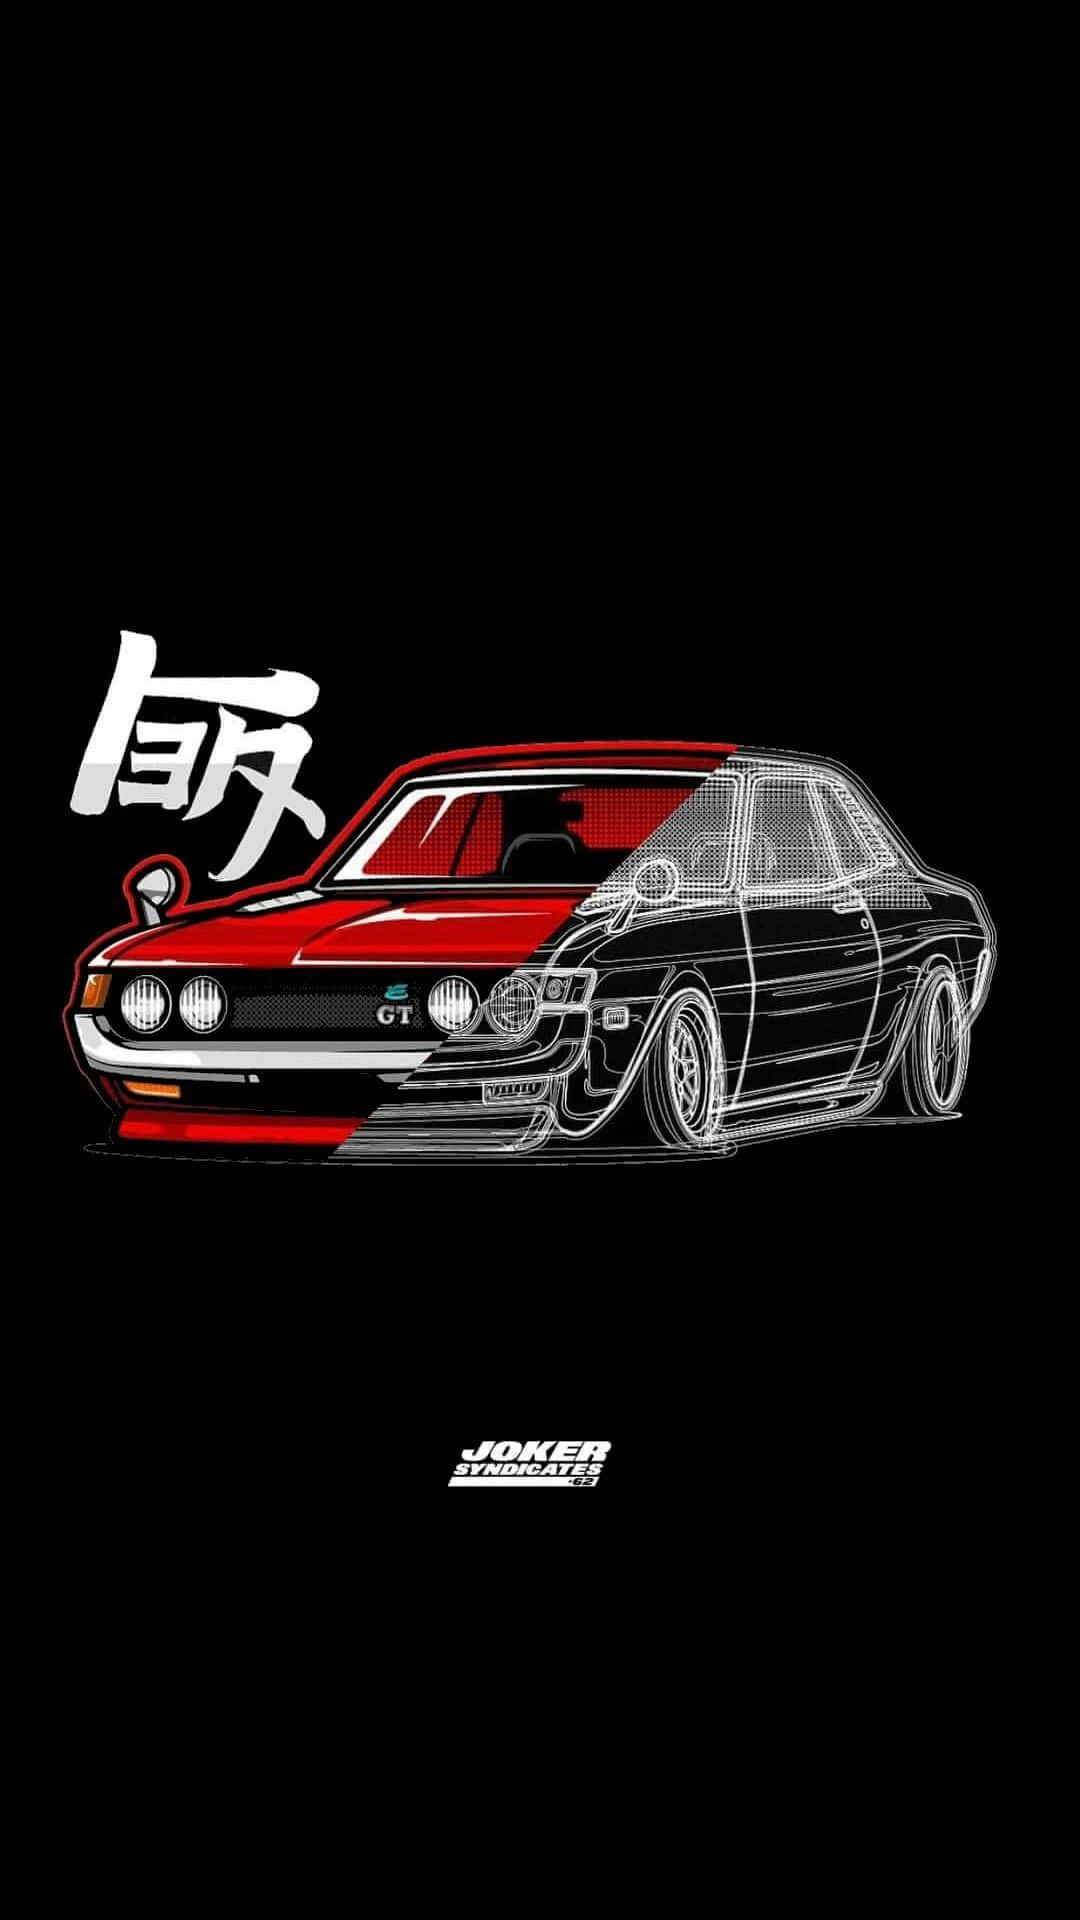 Show Off Your Sleek Jdm Iphone! Background